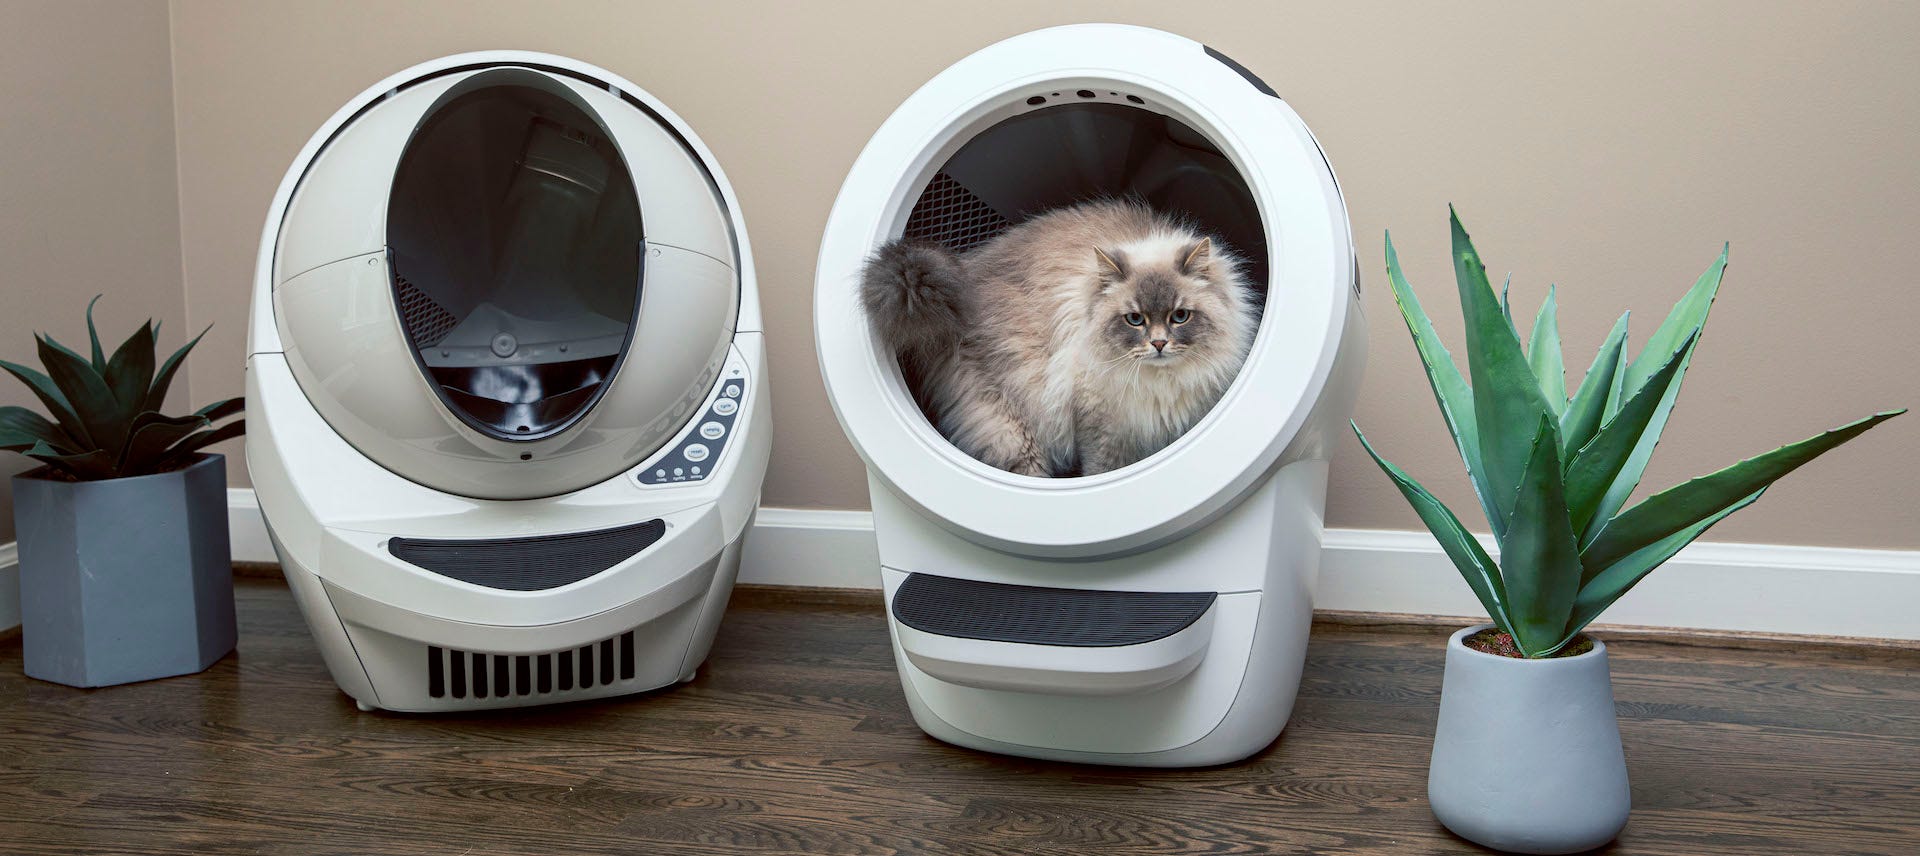 Litter-Robot 3 Connect and Litter-Robot 4 with cat inside